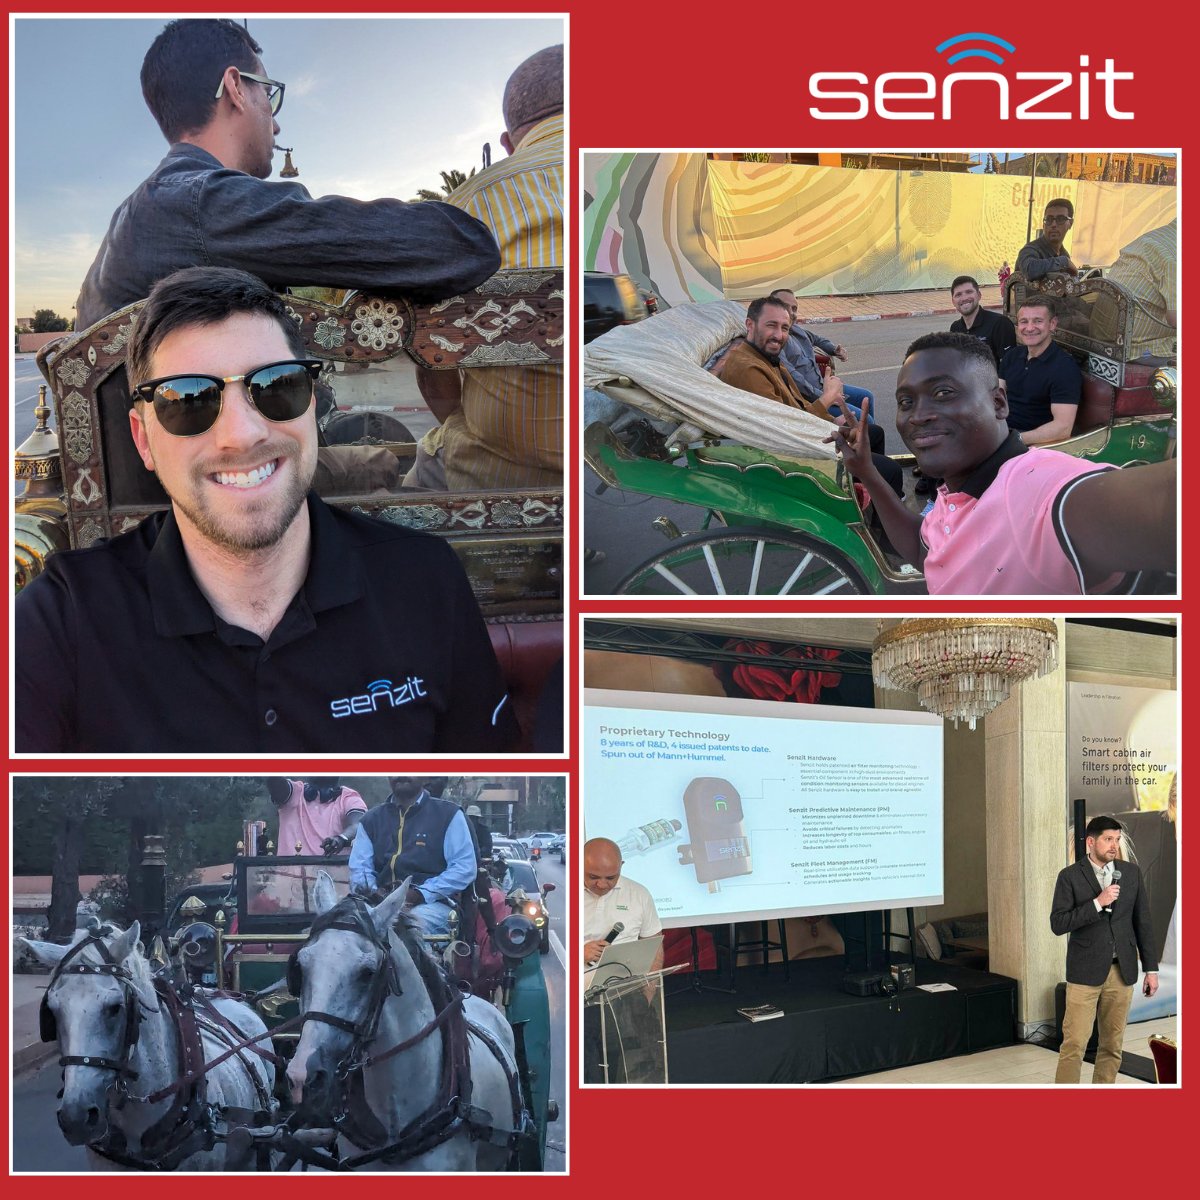 Our COO, Chris Scott, took off to Morocco this week to touch base with our valued Mann+Hummel customers. From insightful discussions to strengthening partnerships, it was a productive trip! 🇺🇸🇲🇦🛫 #CustomerConnections #StrengtheningPartnerships #MannHummel